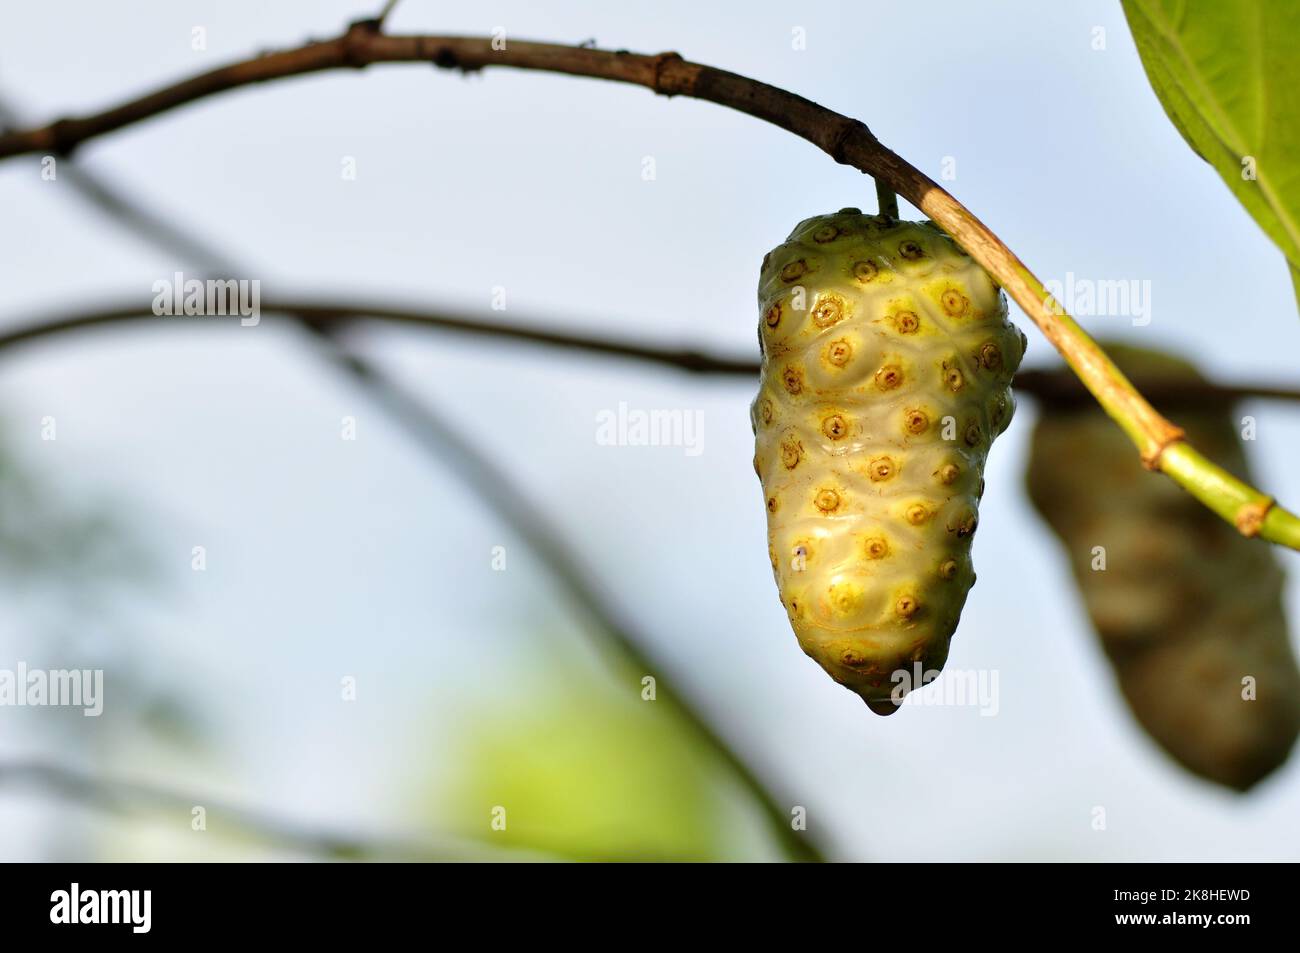 Morinda citrifolia or noni fruit is a fruit bearing tree in the coffee family rubiaceae selective focus Stock Photo